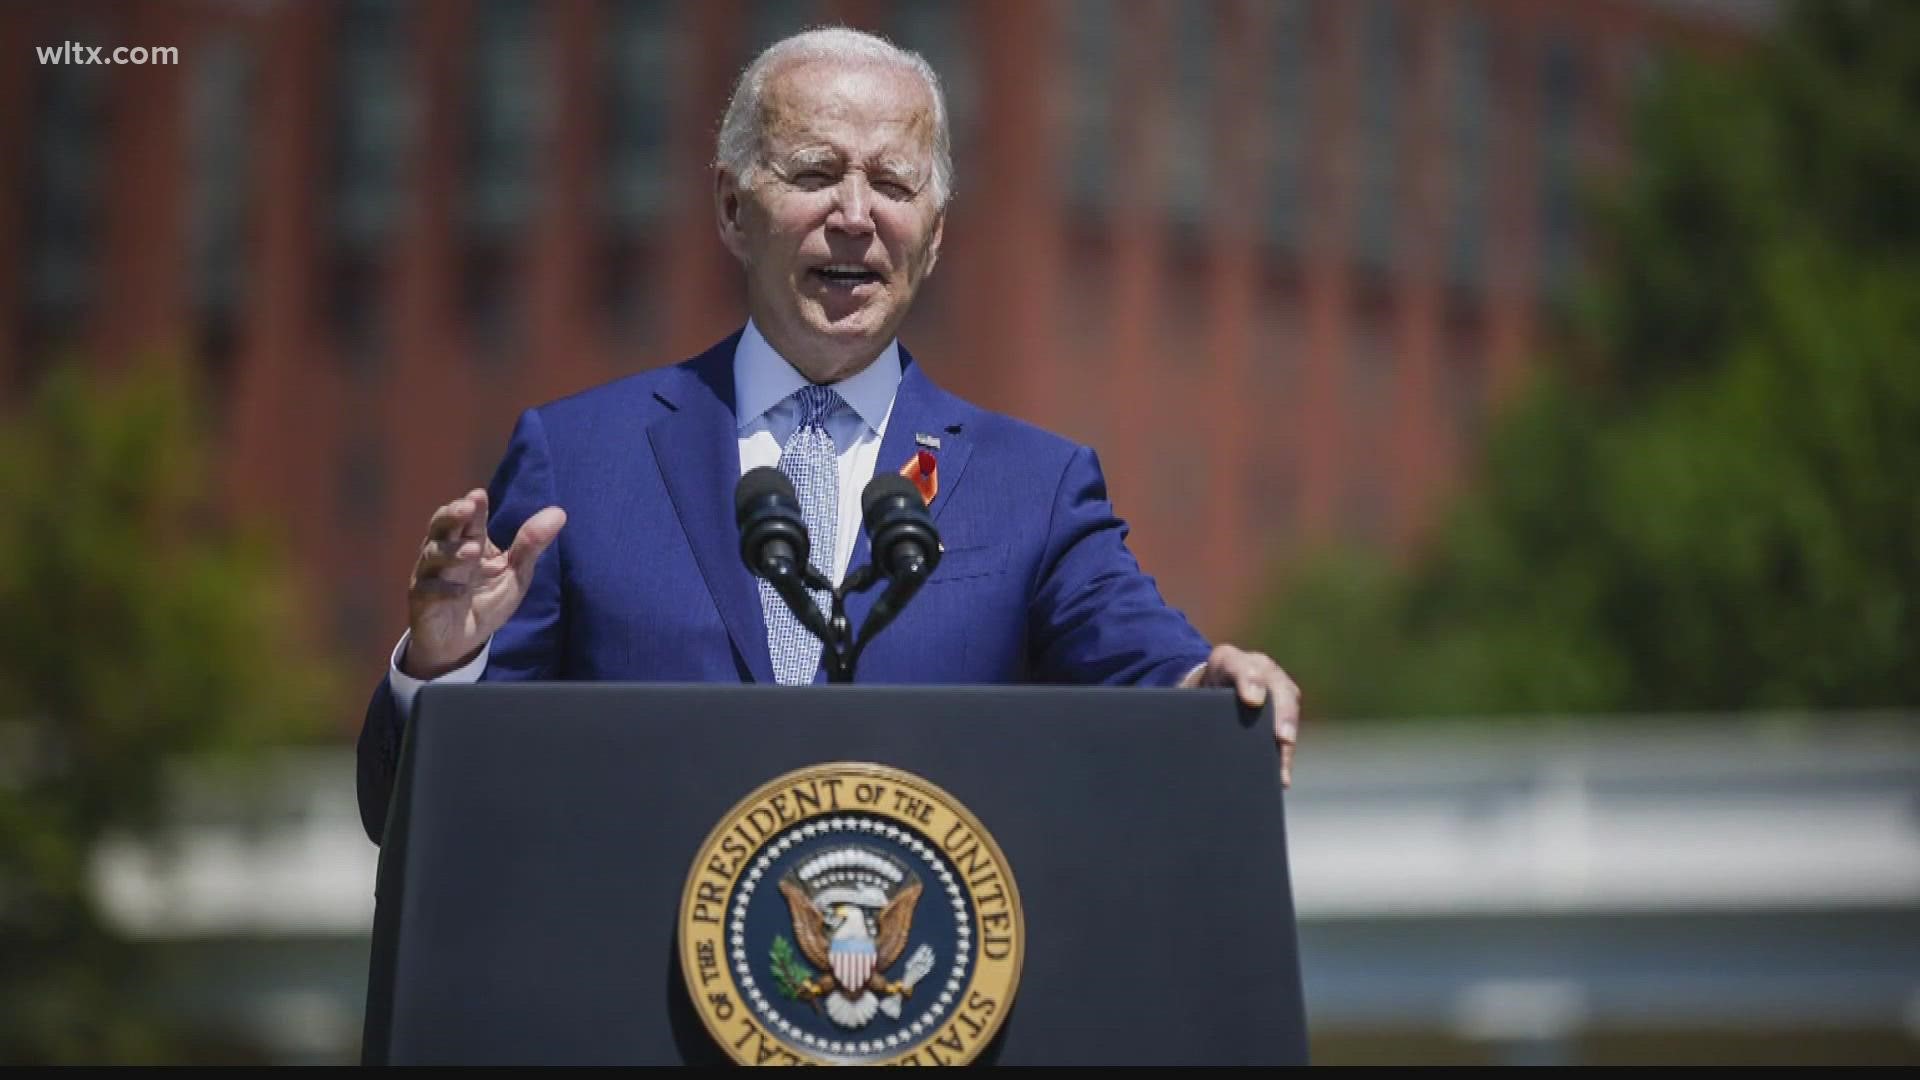 President Joe Biden tested positive for COVID-19 on Thursday and is experiencing "very mild symptoms," the White House announced.